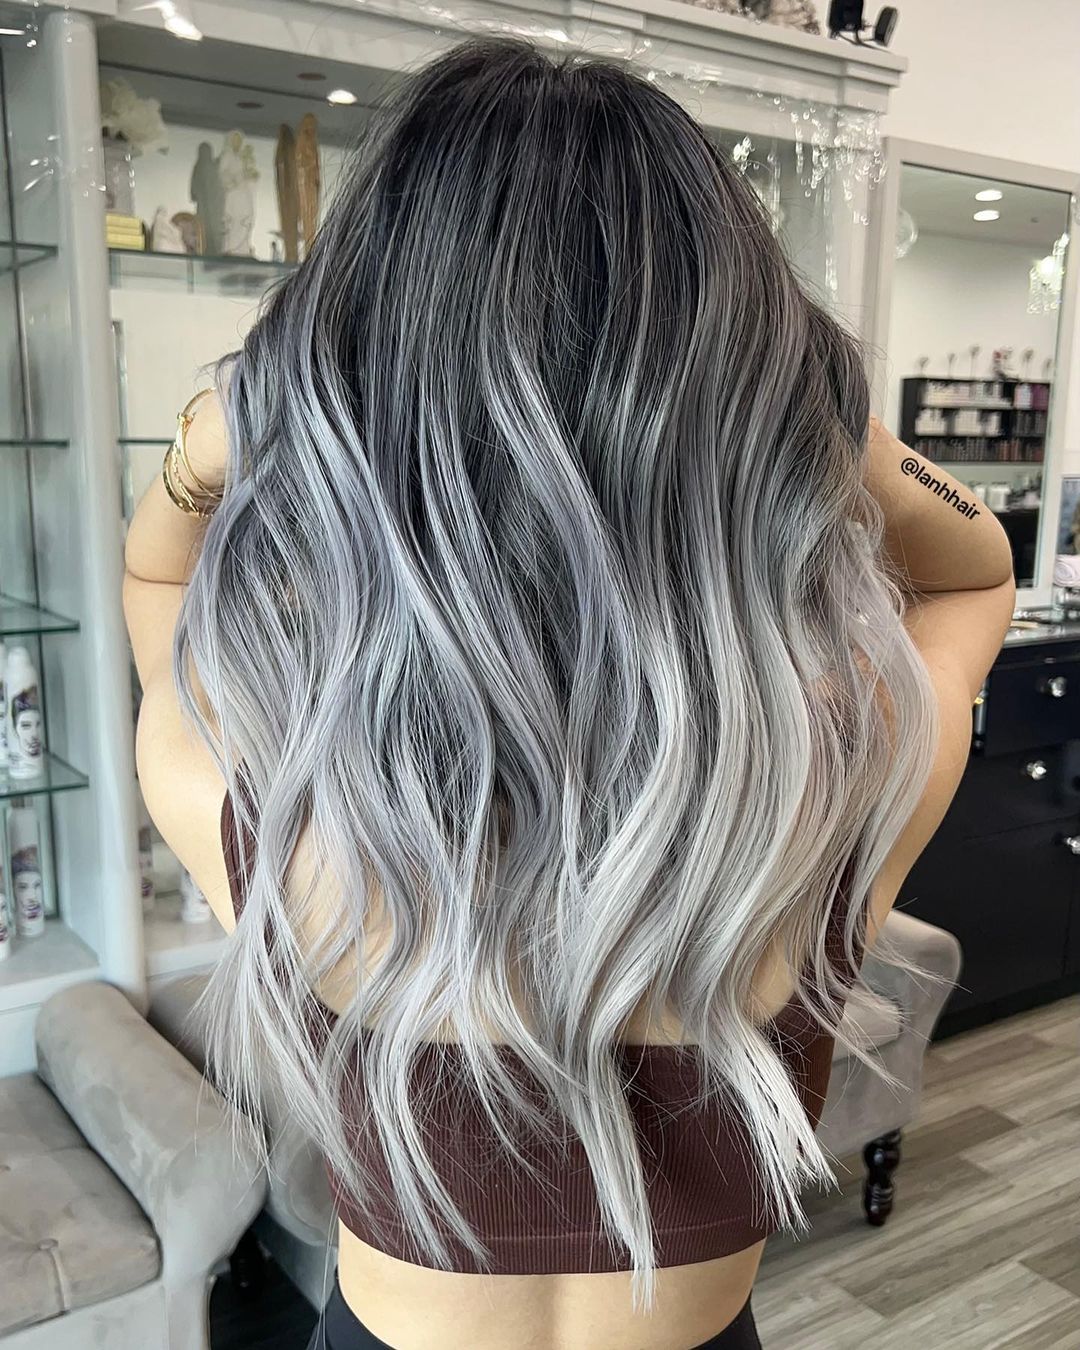 Long Black to Silver Ombre Hair